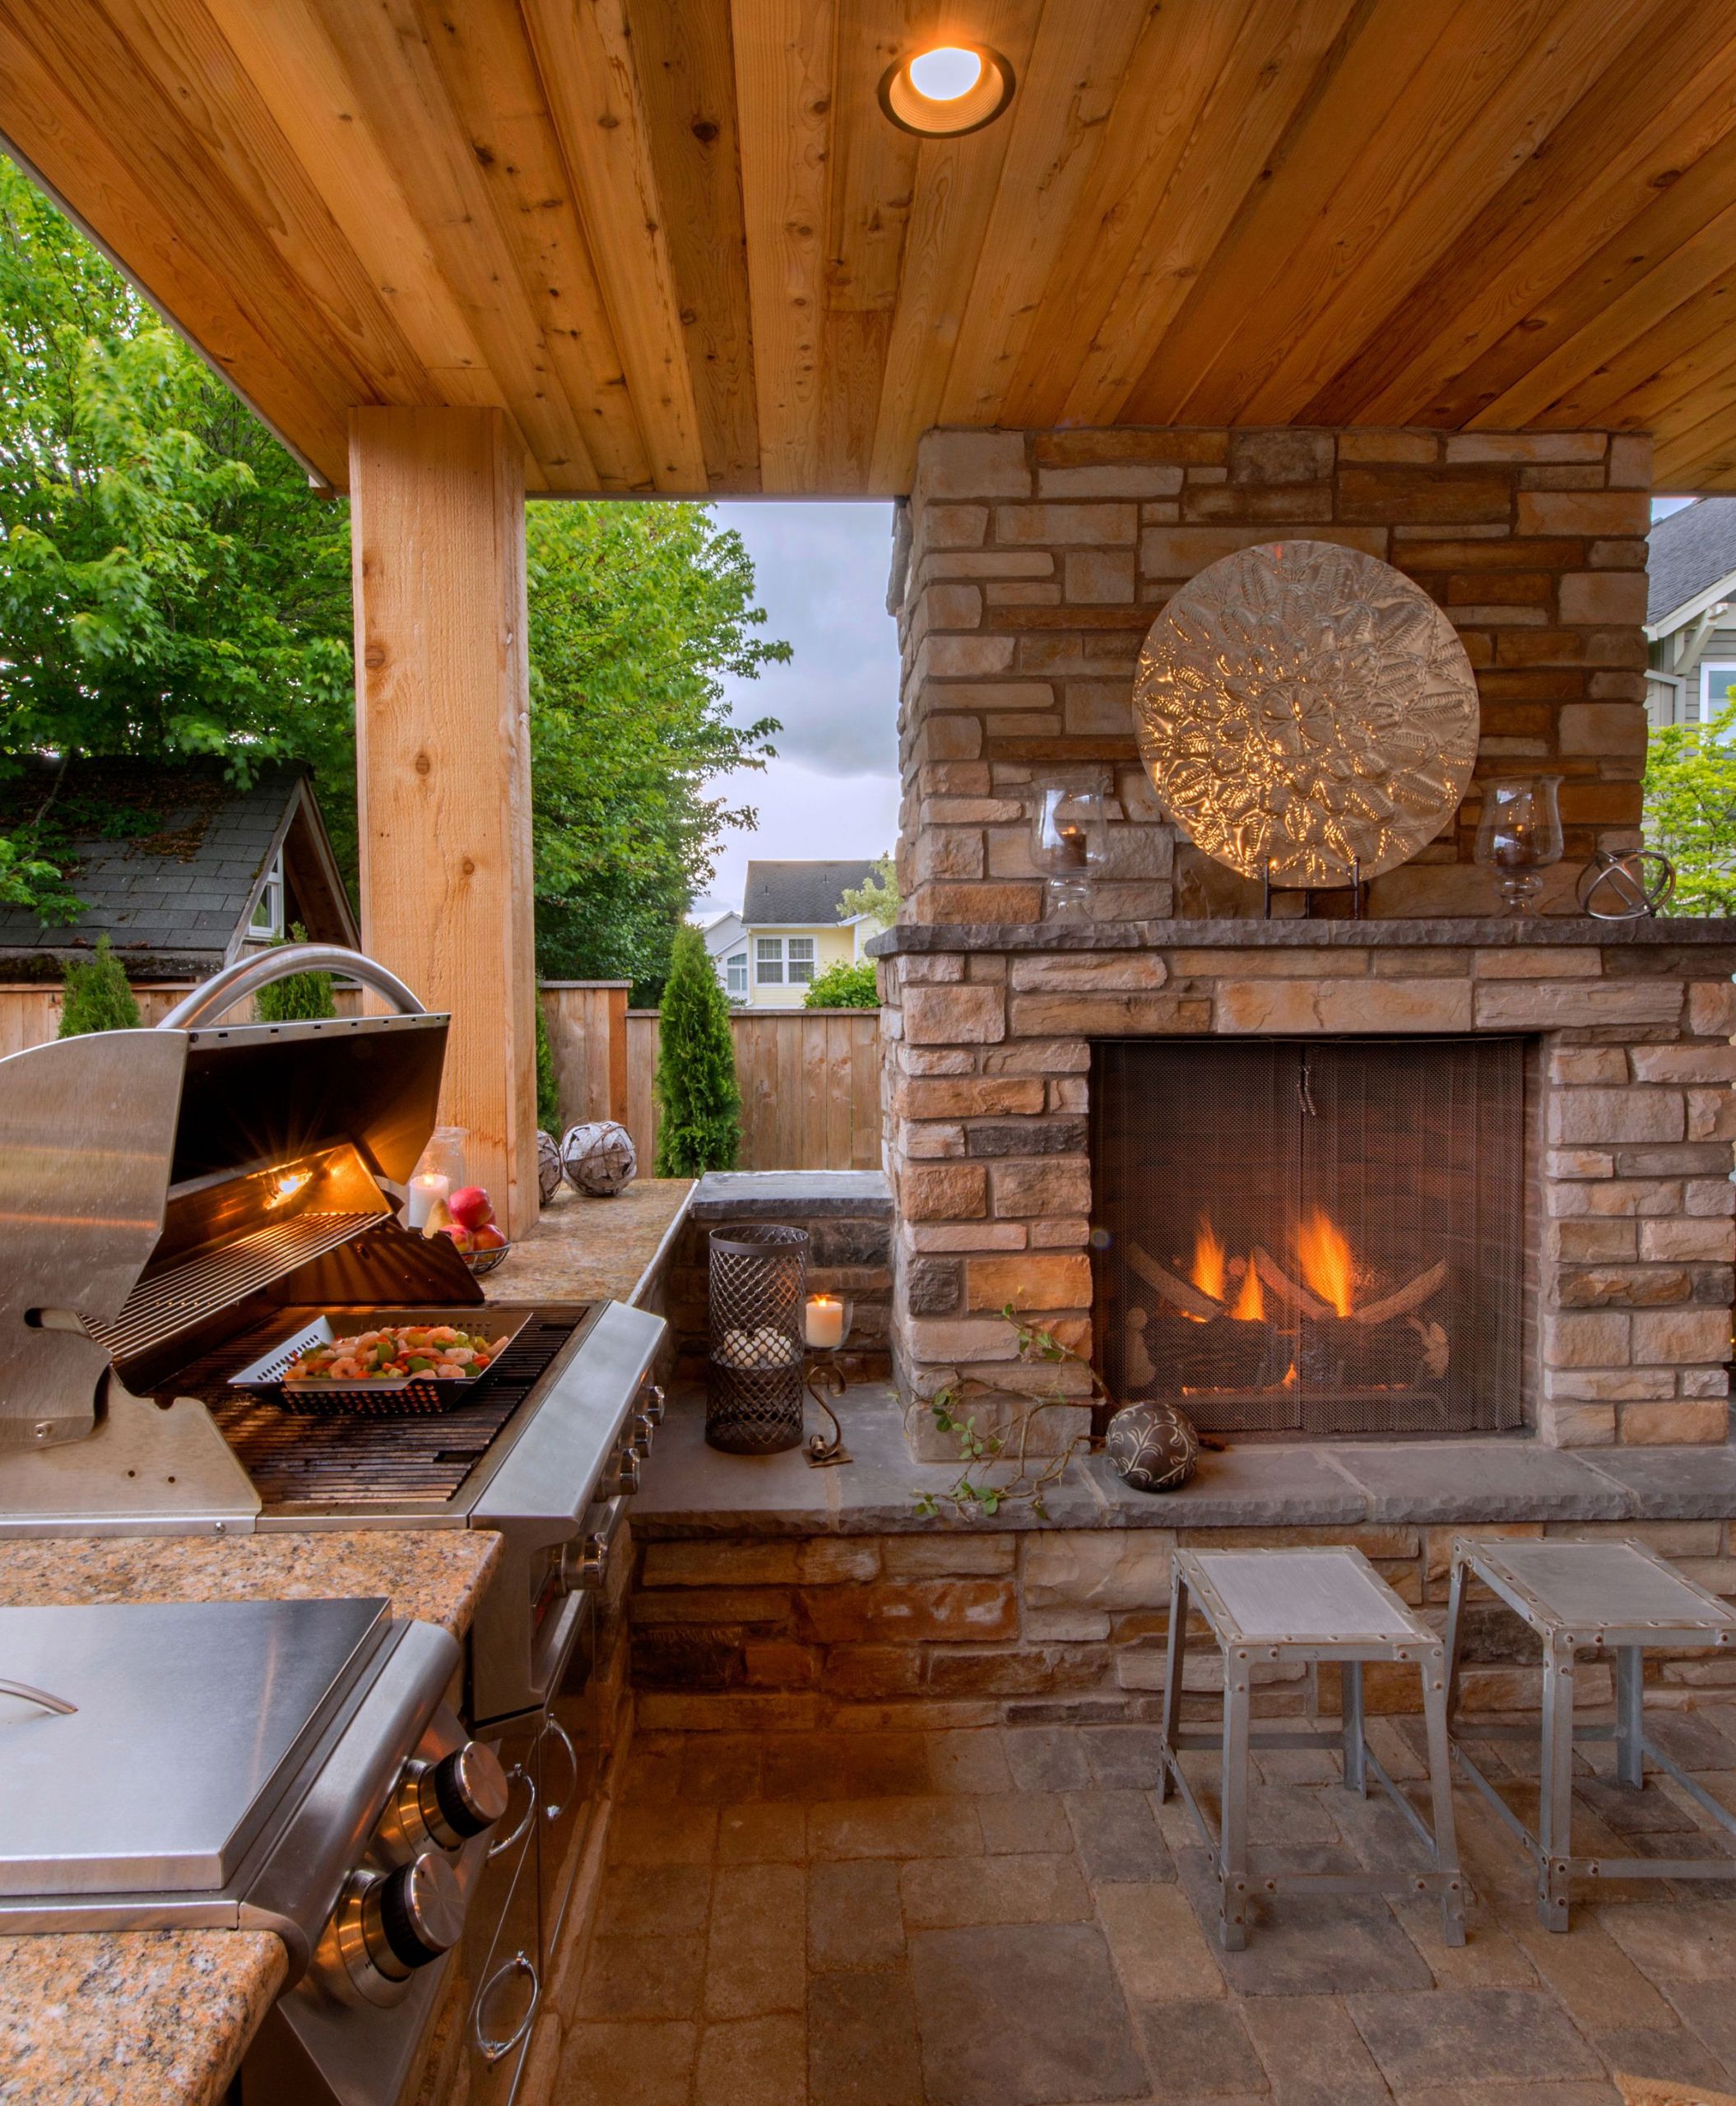 Outdoor Kitchen With Fireplace Designs
 Pin by Outdoor Living on Outdoor Kitchen